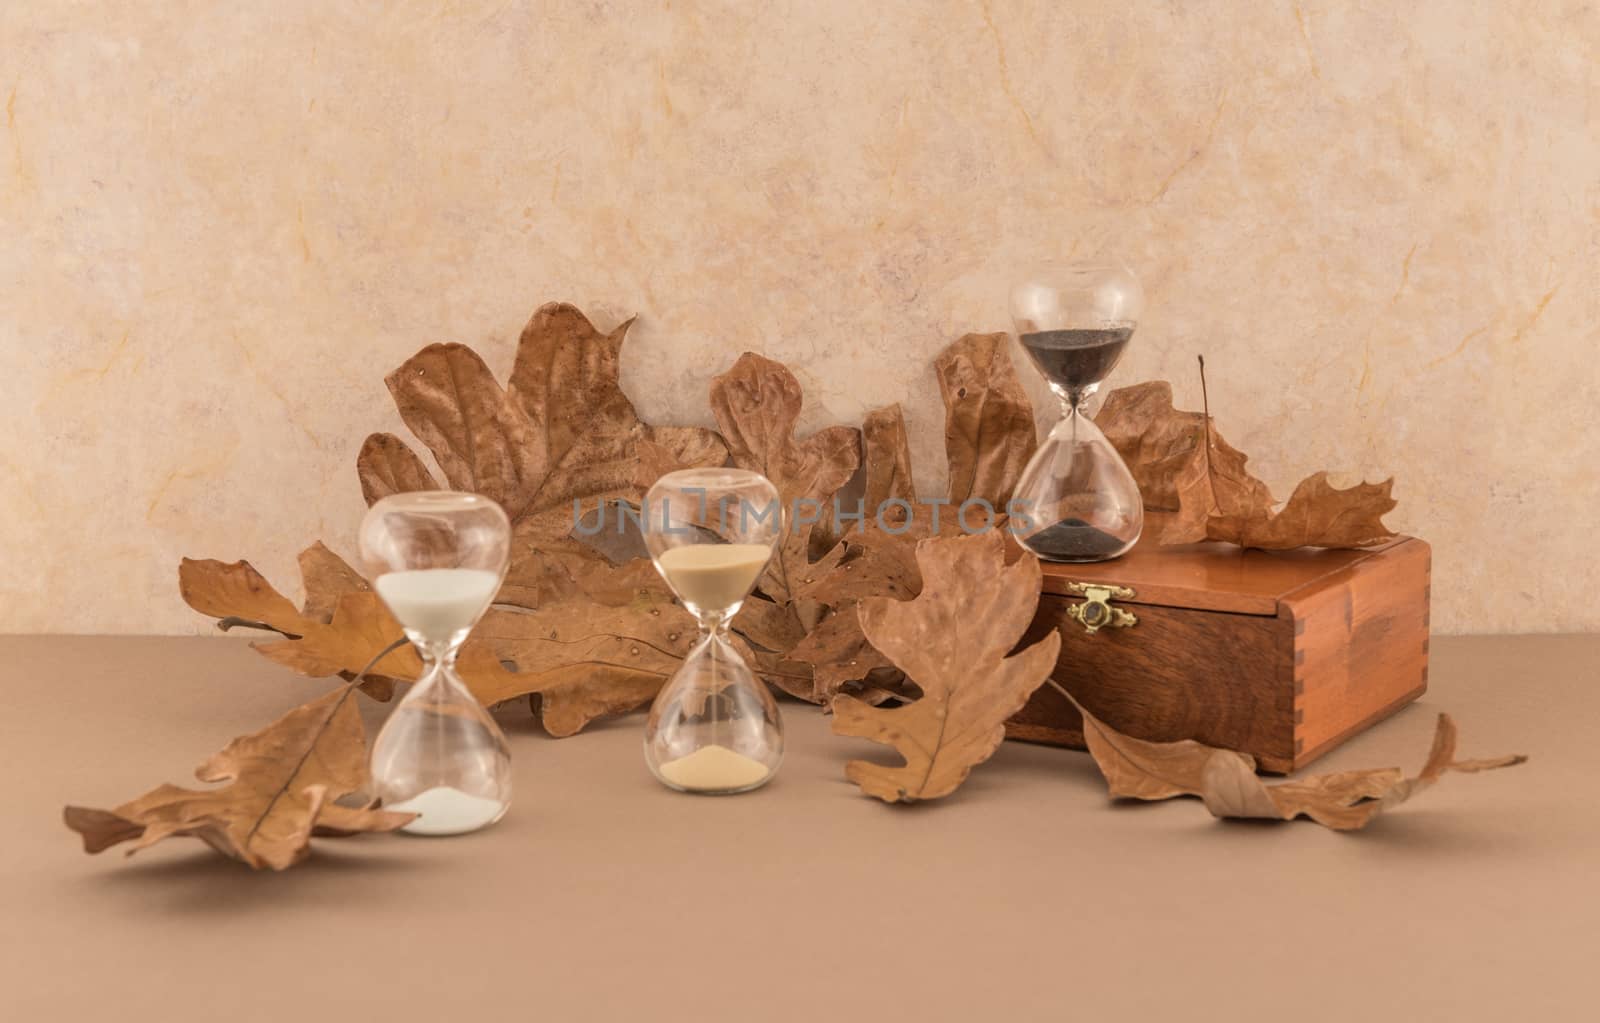 Hourglasses and Autumn Leaves by krisblackphotography